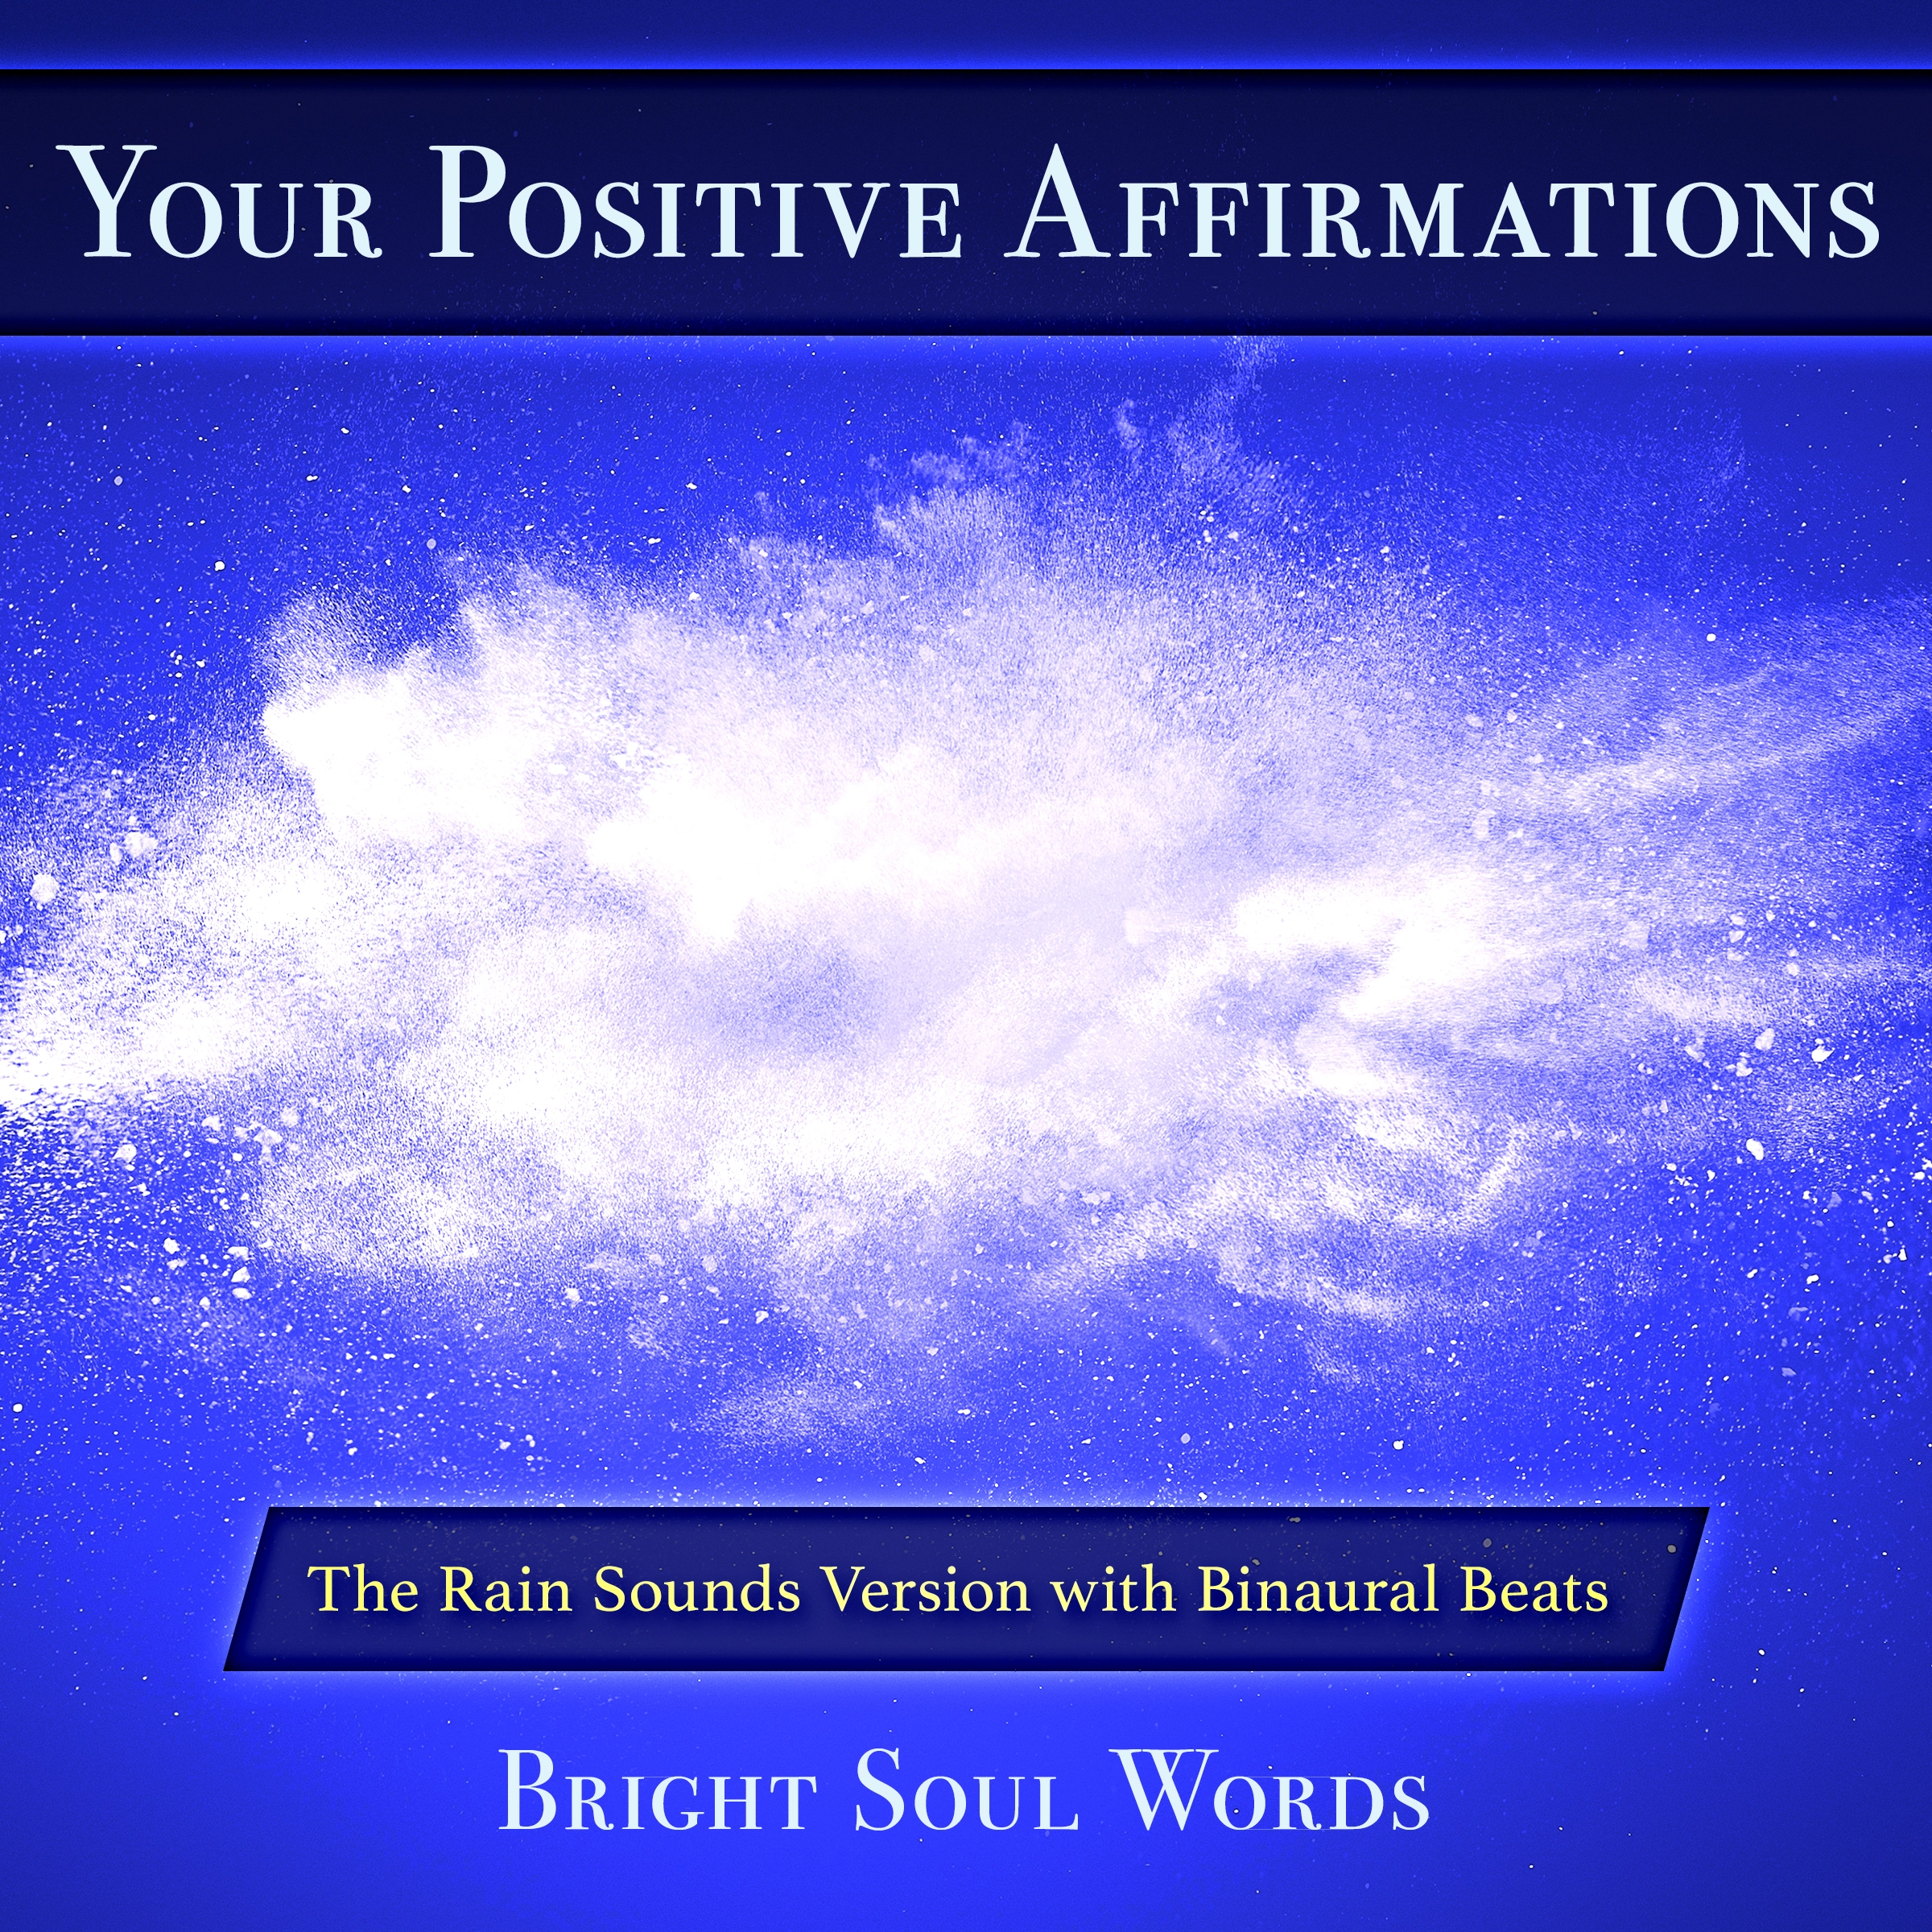 Your Positive Affirmations: The Rain Sounds Version with Binaural Beats Audiobook by Bright Soul Words